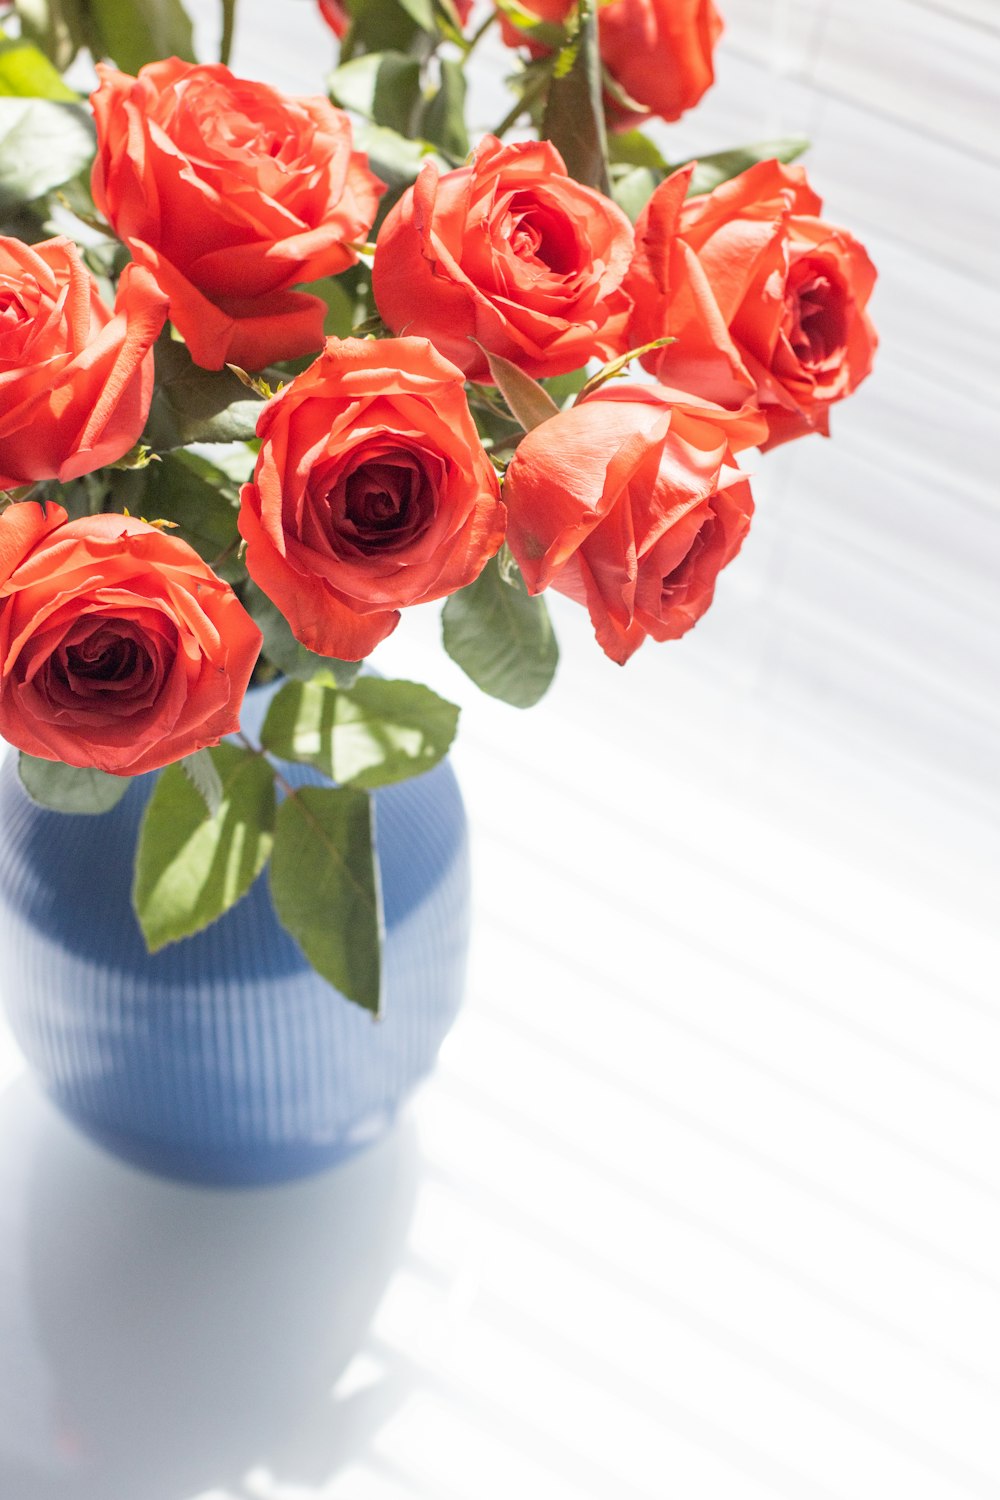 a blue vase filled with red roses on a table